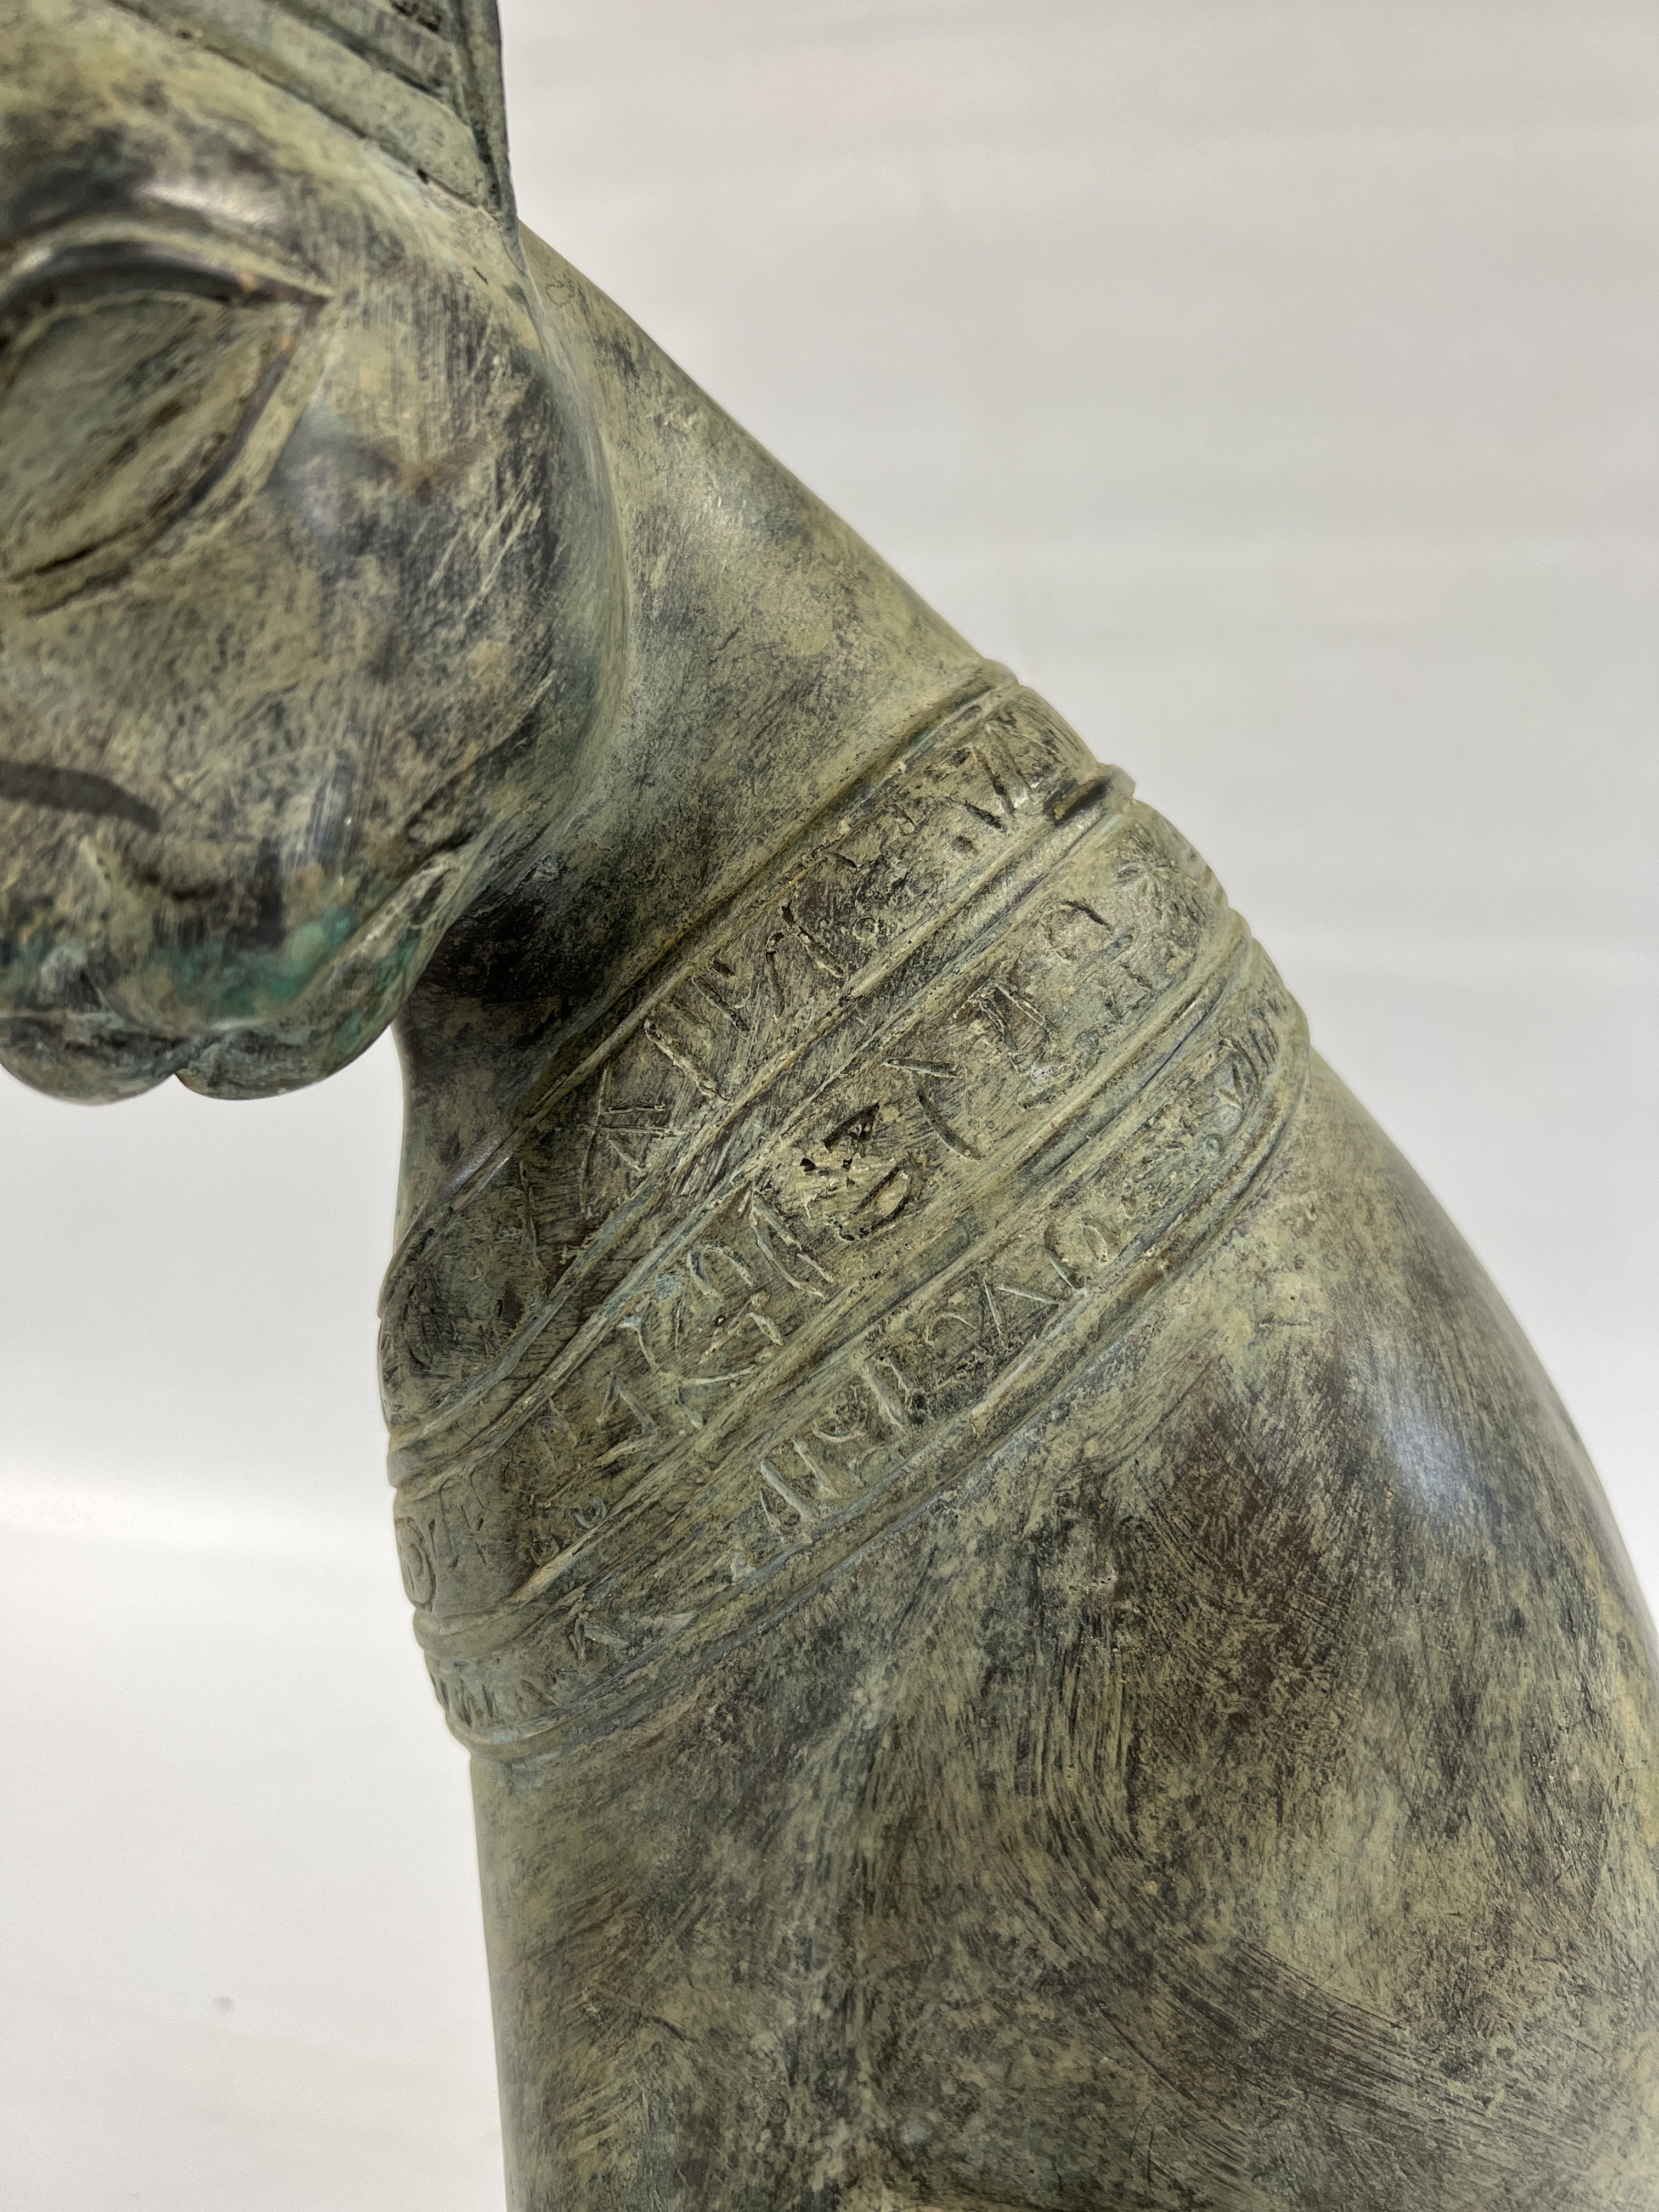 A BRONZE STUDY OF A SPHYNX - HEIGHT 49CM. - Image 3 of 11